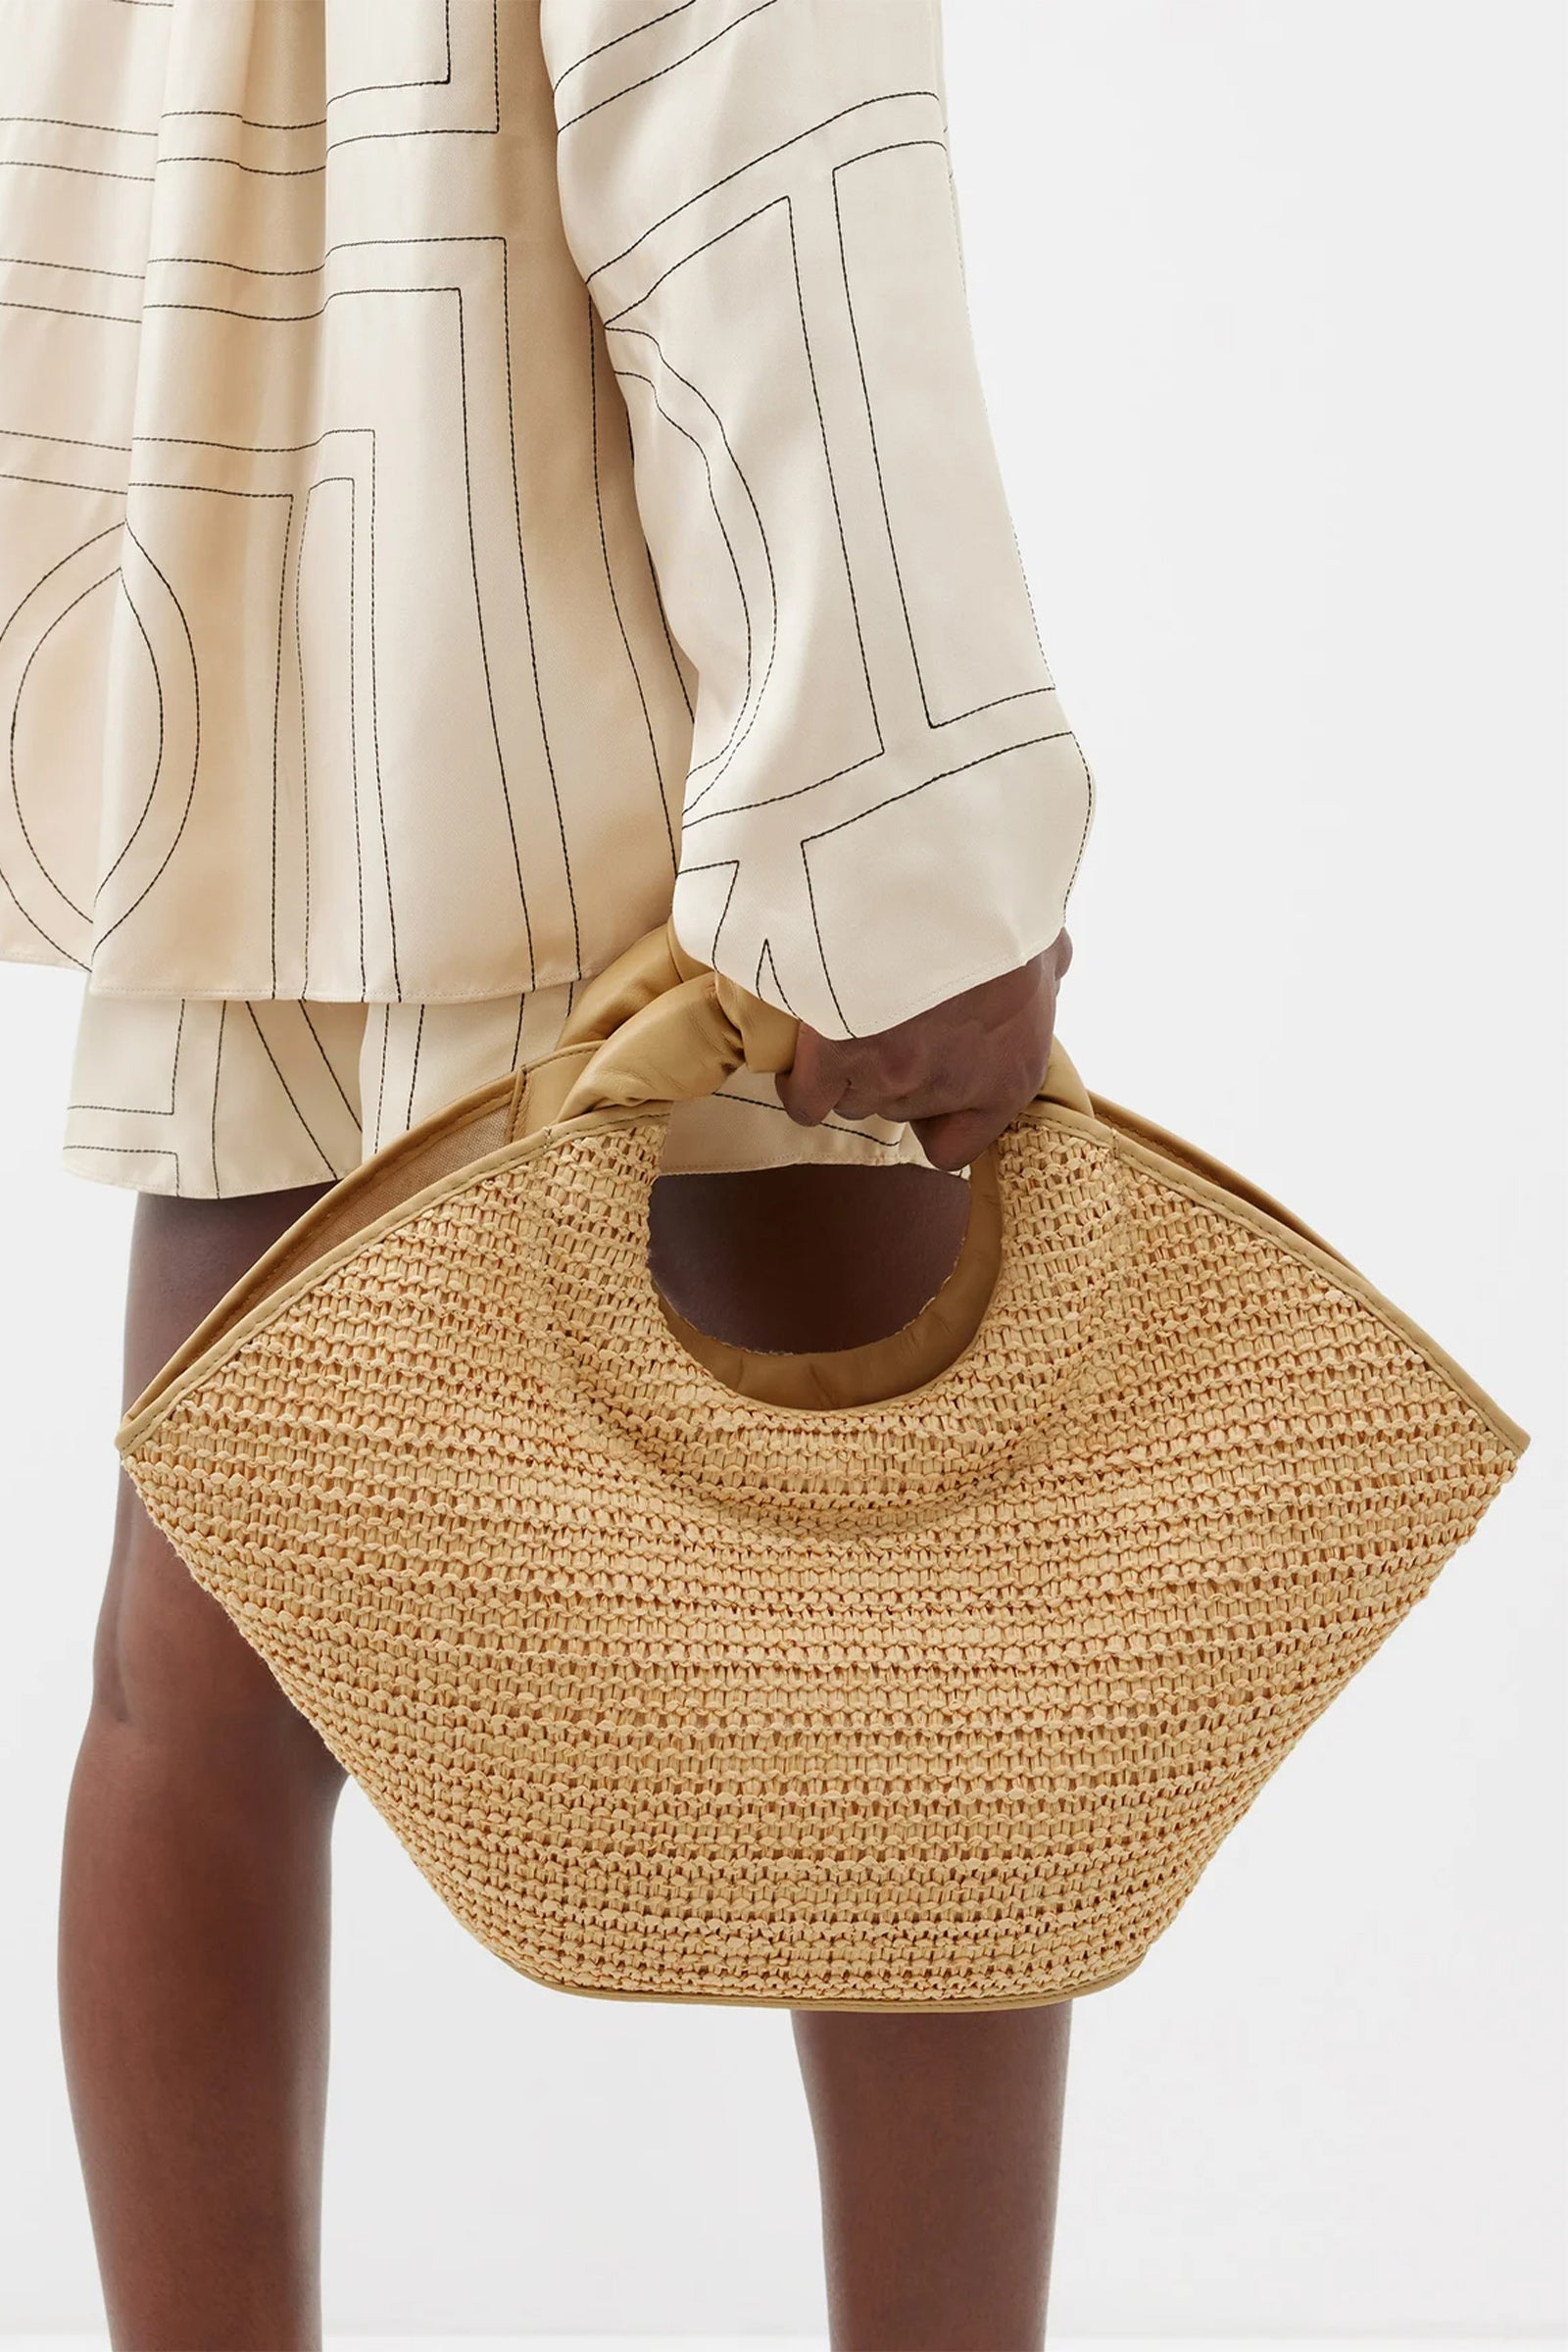 Loewe Large Basket Bag in Palm Leaf and Calfskin, Beige, * Inventory Confirmation Required